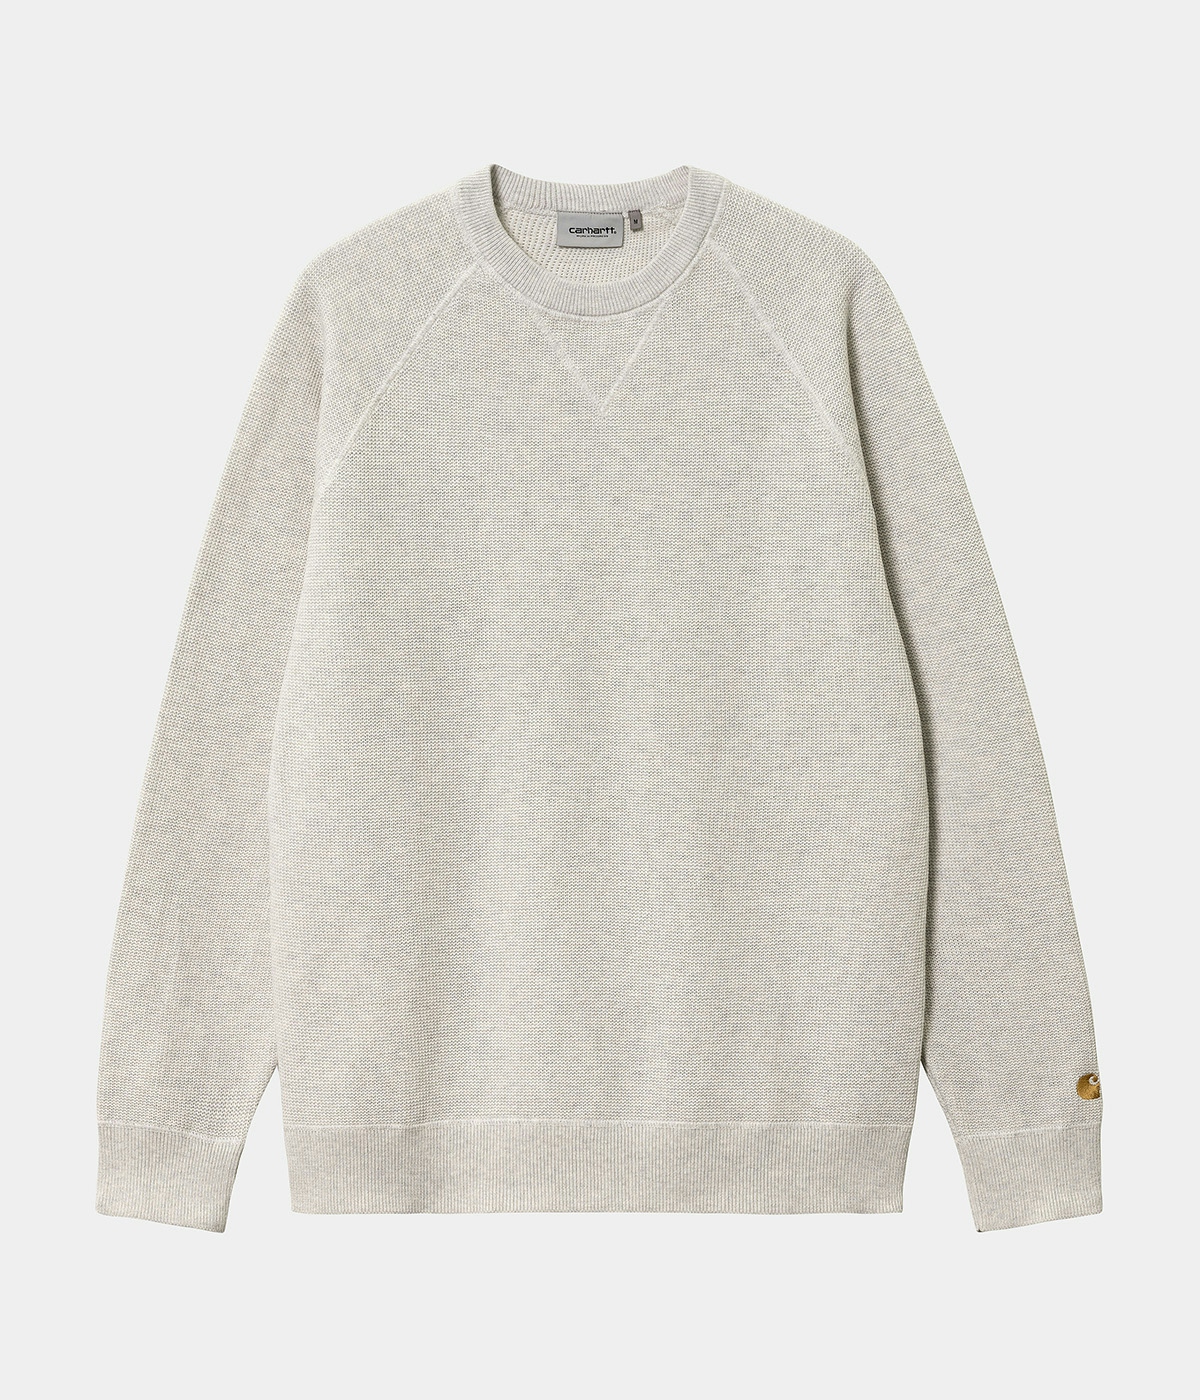 Carhartt Chase Sweater Ash Heather / Gold 1